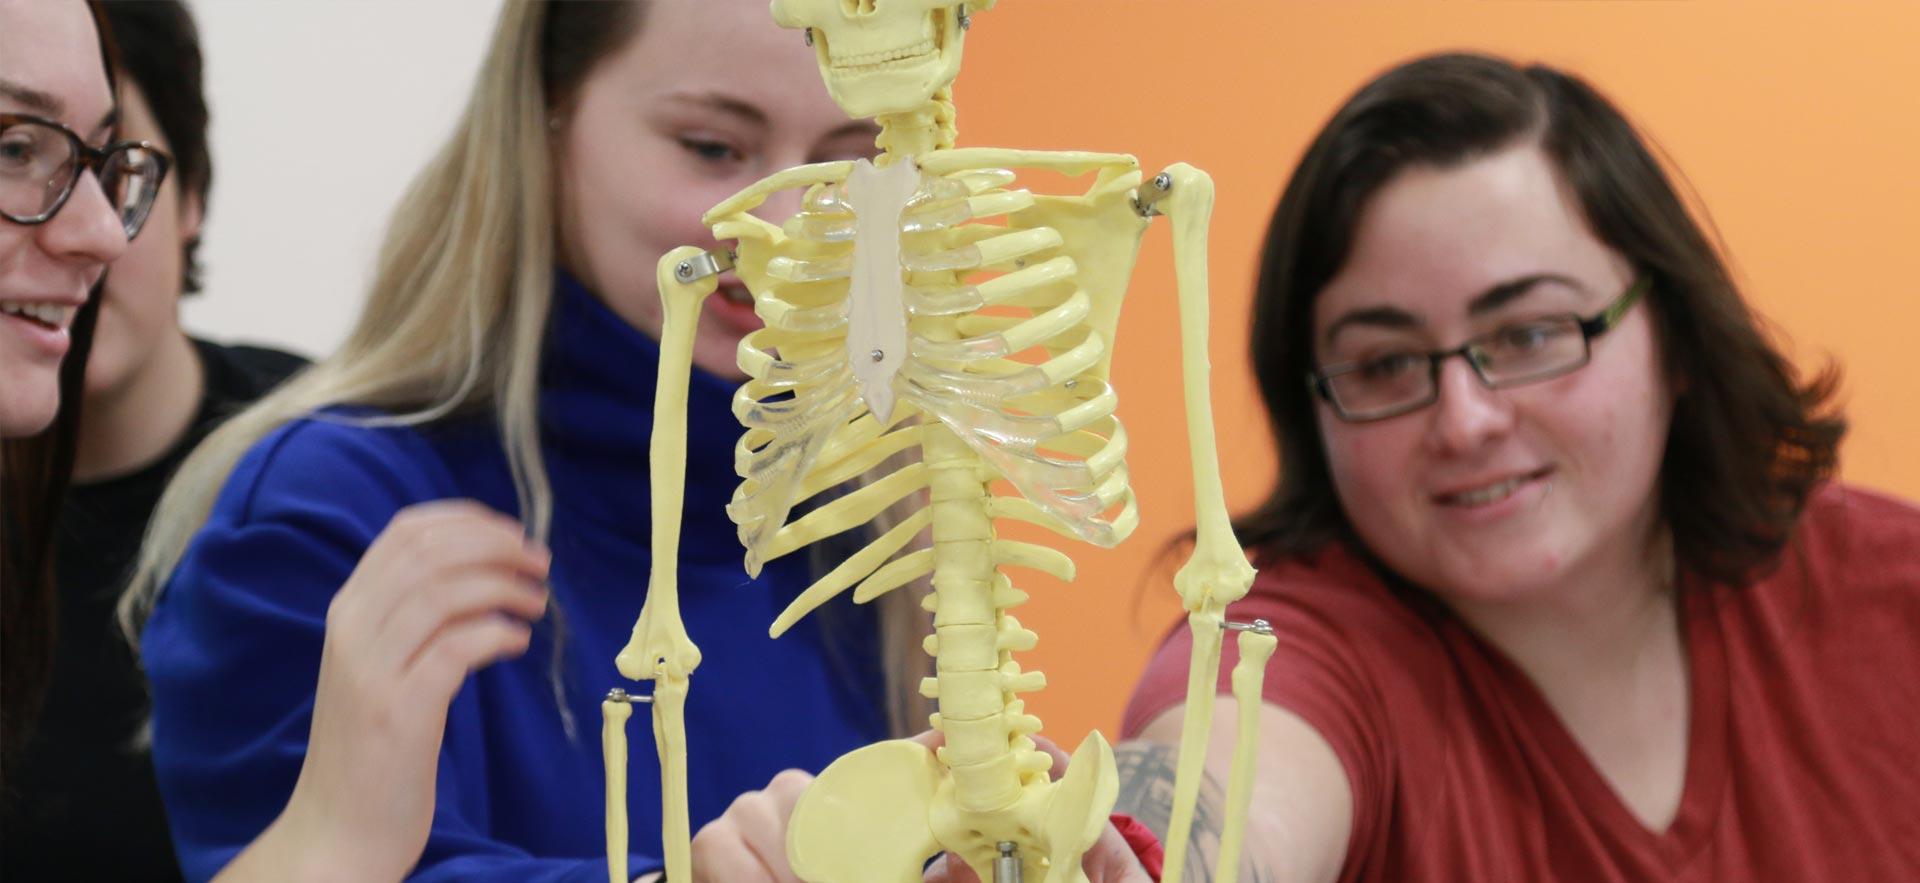 Female fitness and health students review a human skeleton model.